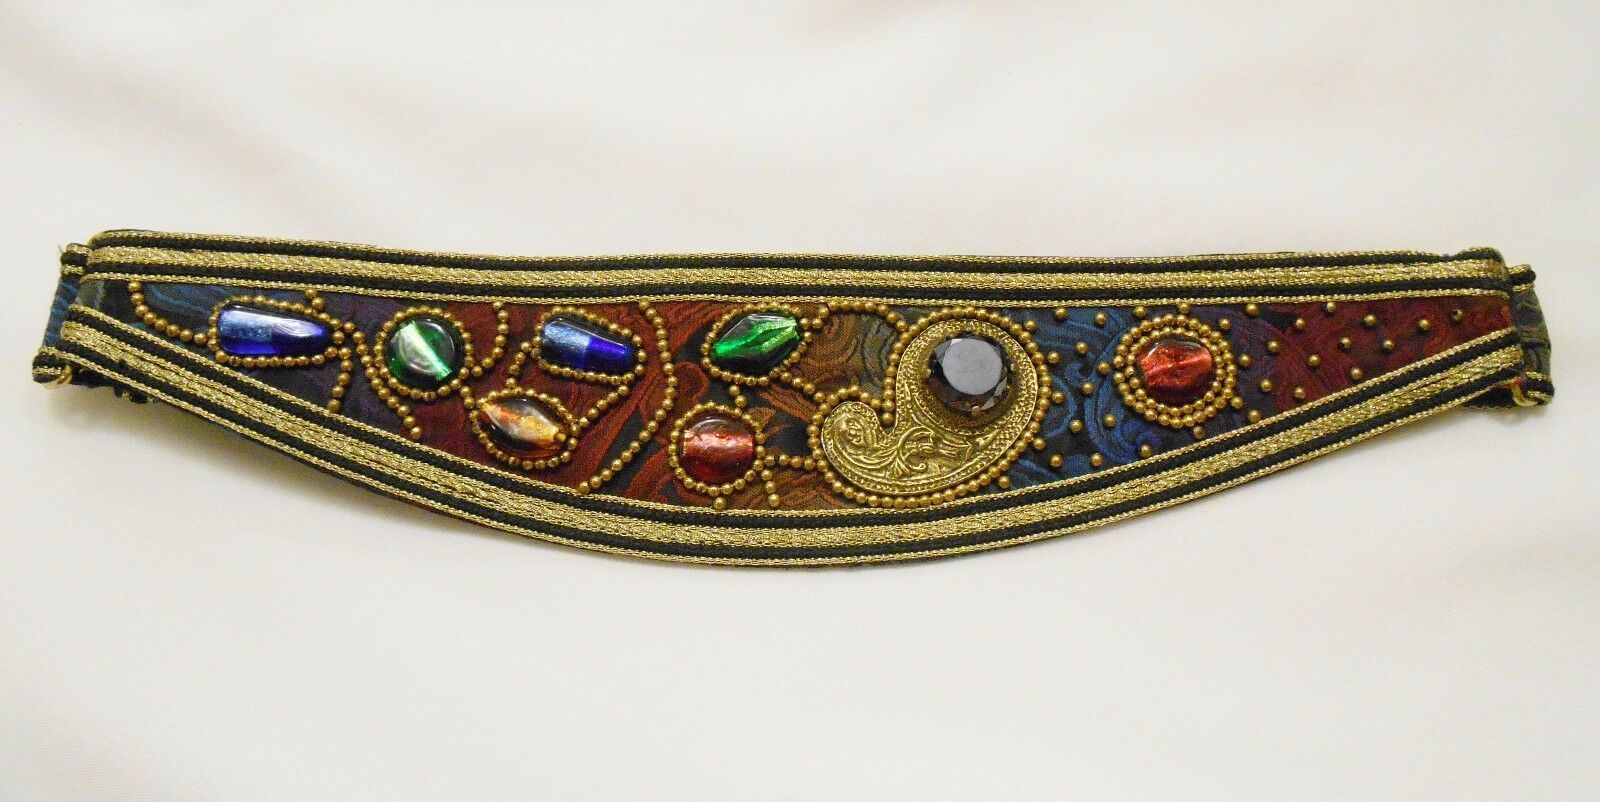 Primary image for R J GRAZIANO Women's BELT Vintage 1980's Leather Glass Bead & Metal Art SMALL S